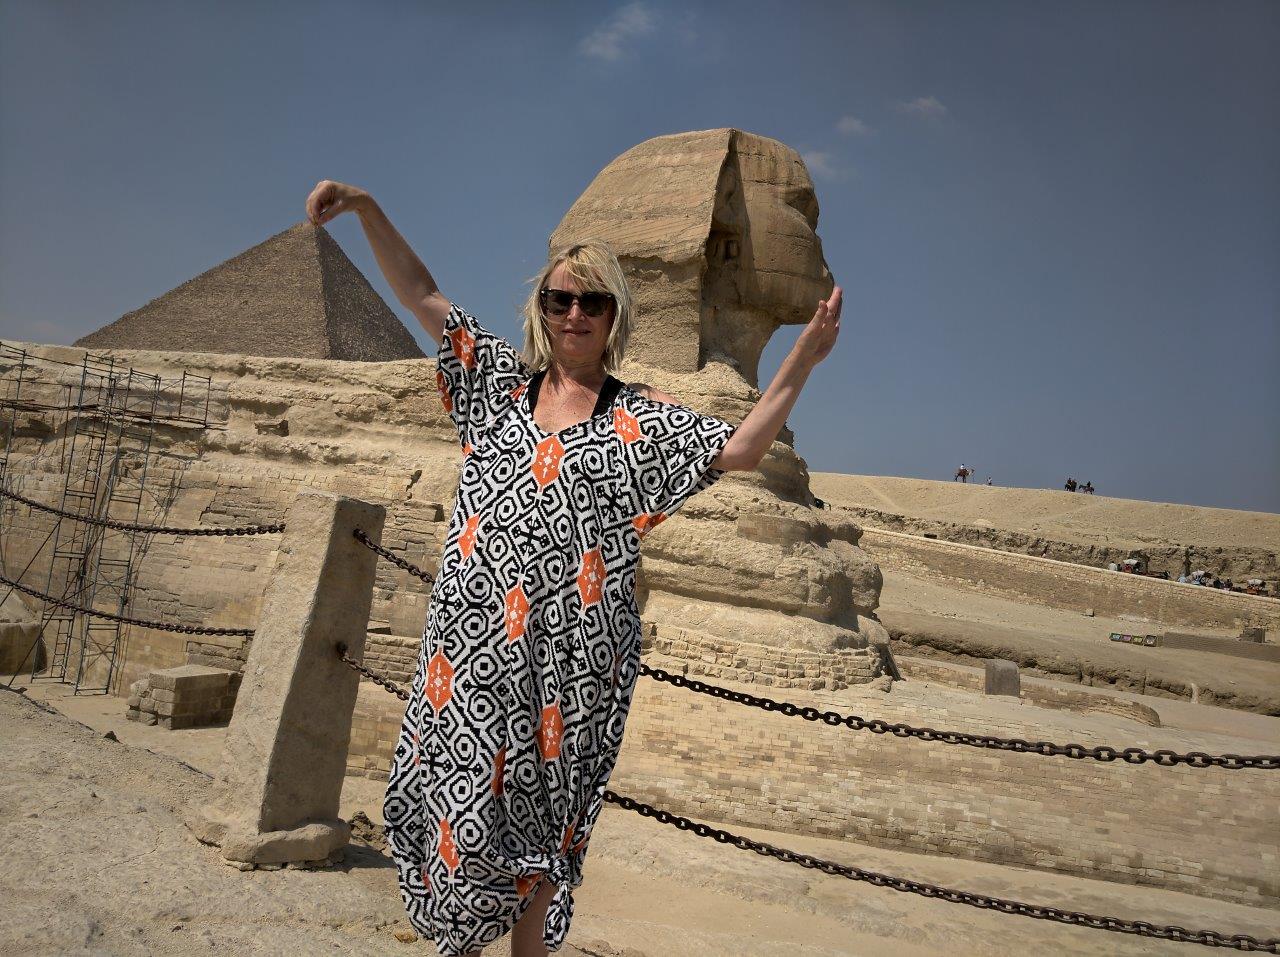 I know, I know, I know. This is cheesy - this is what tourists should never do. This is dumb - BUT you know what. It's Egypt. It's a POSTCARD from the Pyramids. 